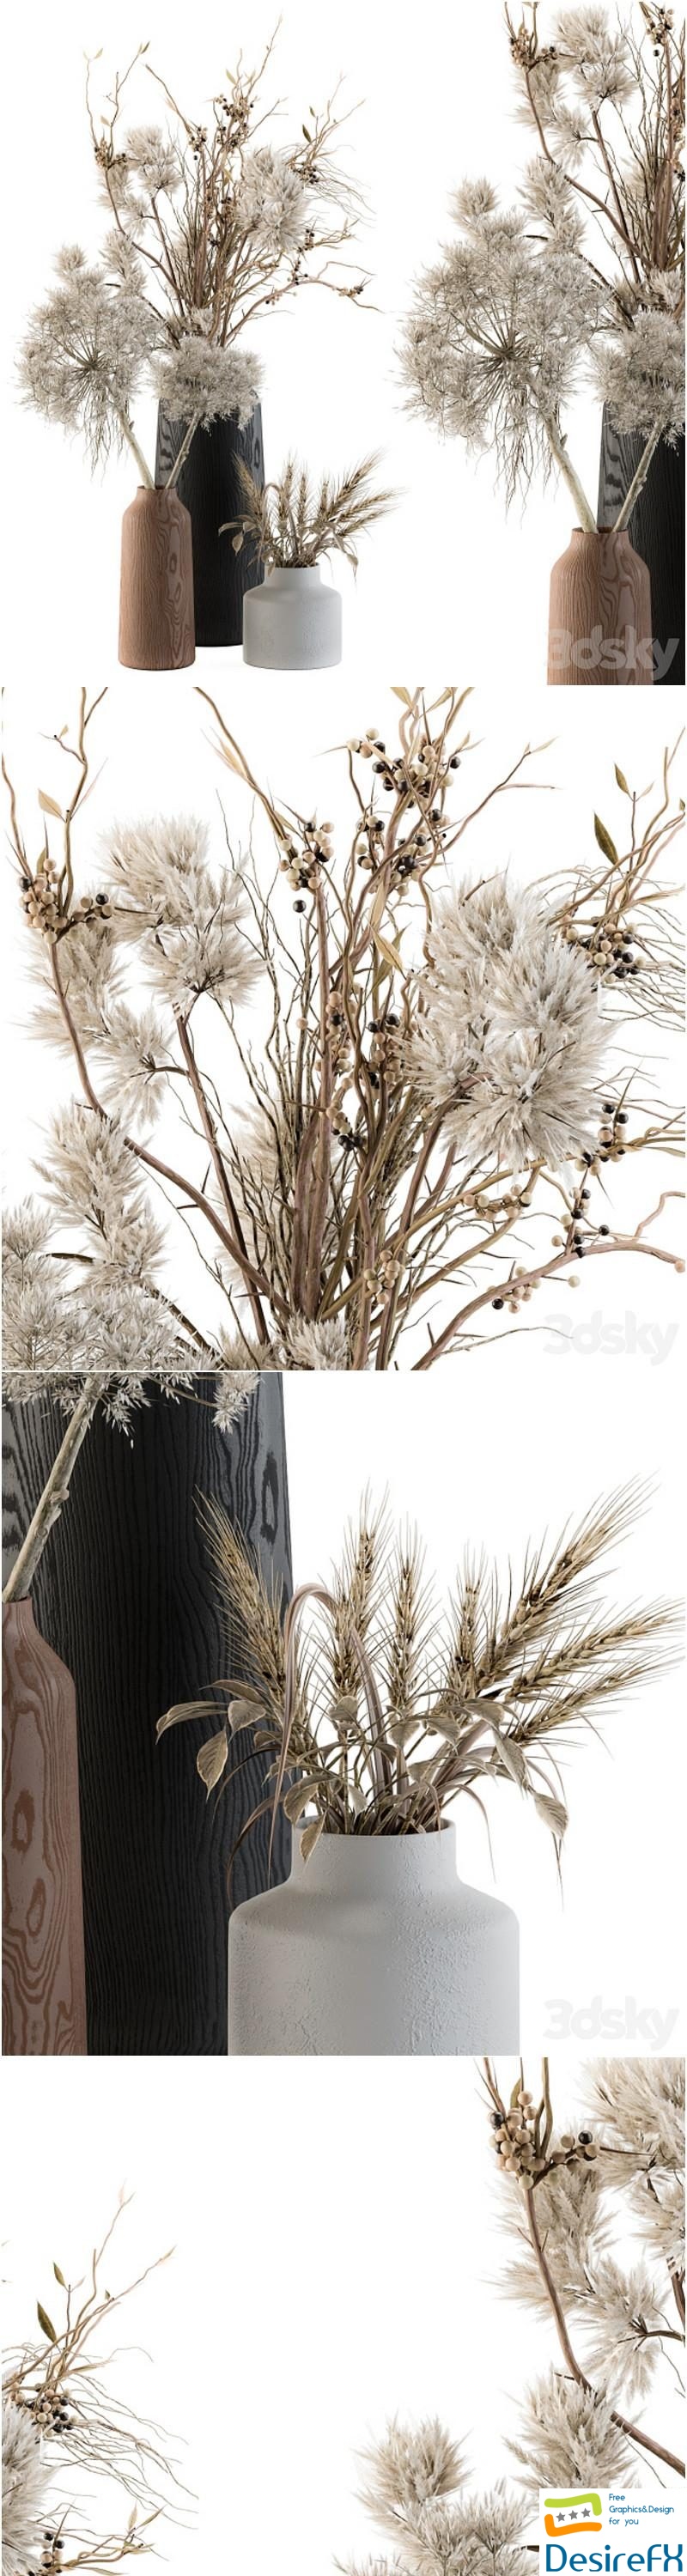 Dry plants 33 - Pampas and Dried Branch 3D Model